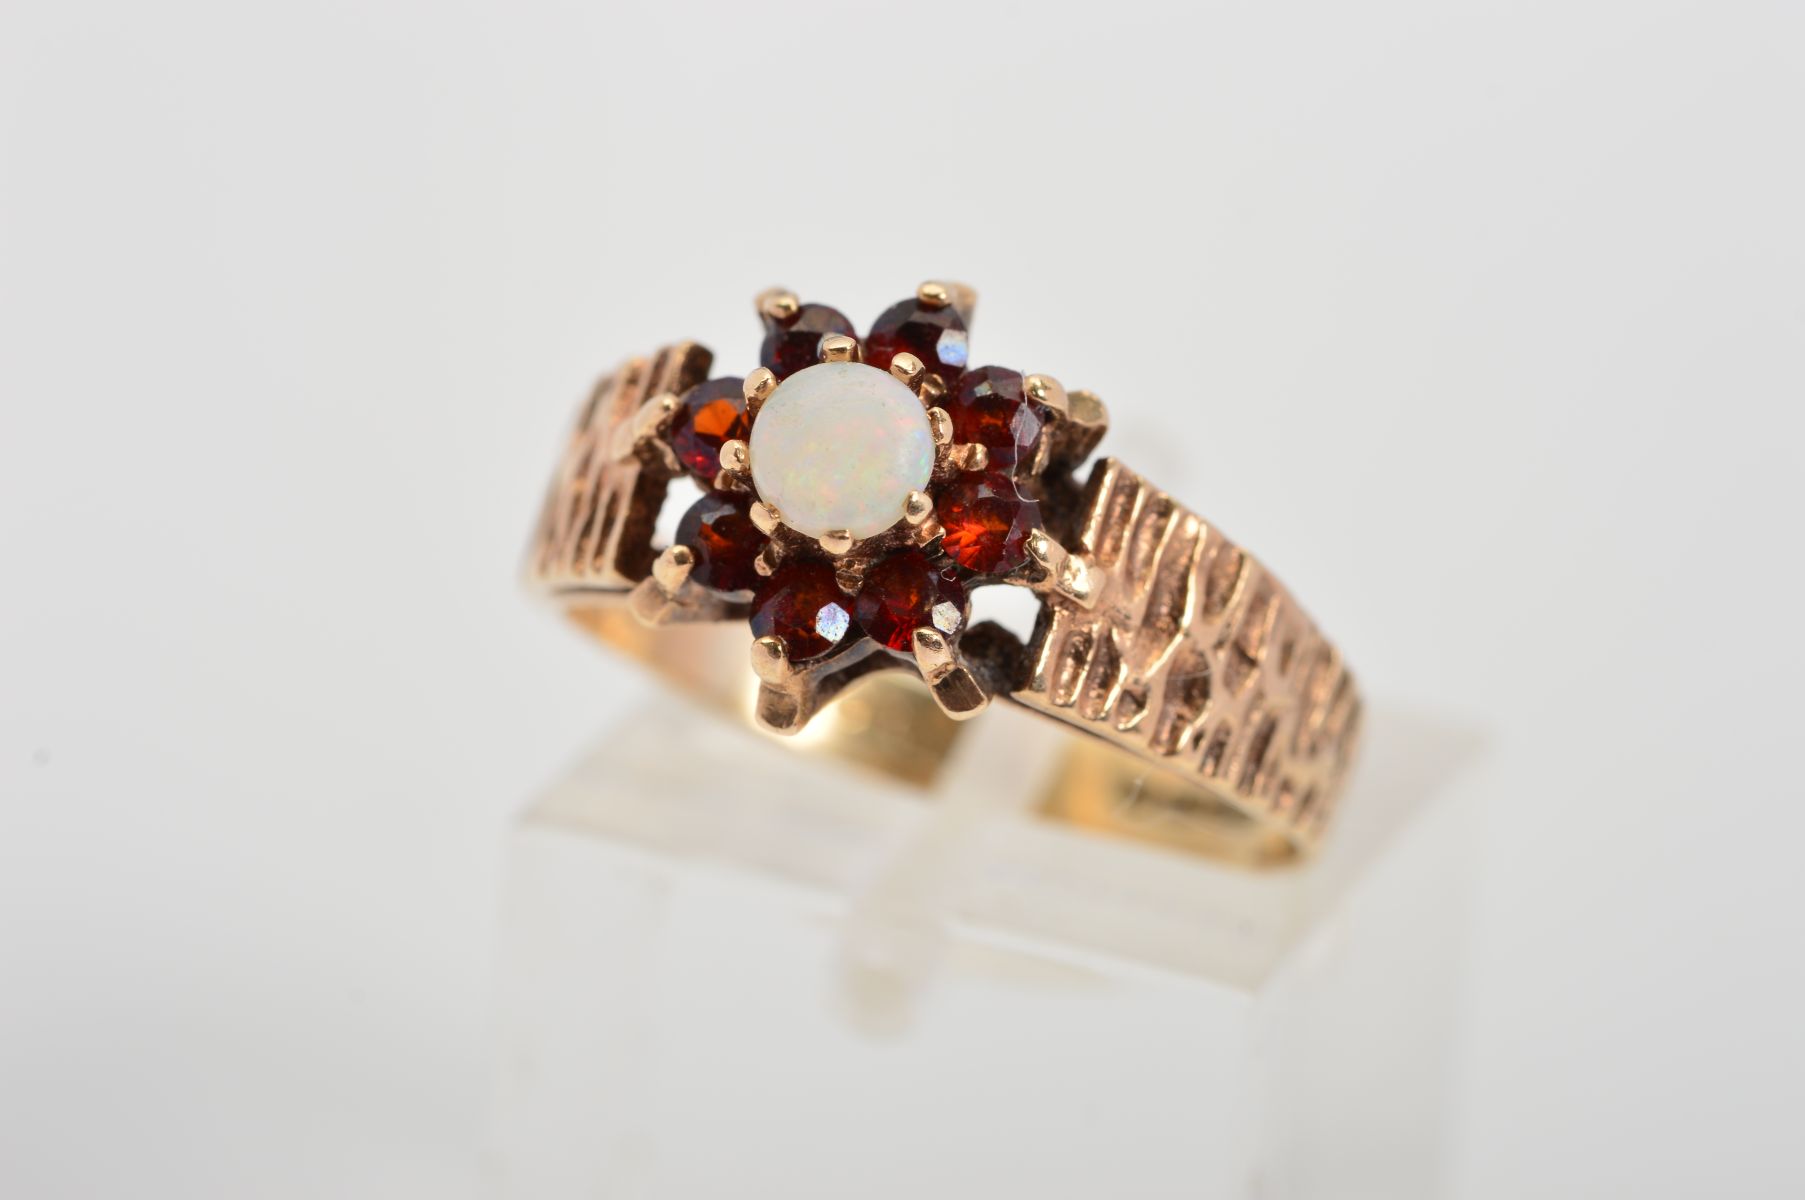 A 9CT GOLD OPAL AND GARNET CLUSTER RING, designed as a central circular opal cabochon within a